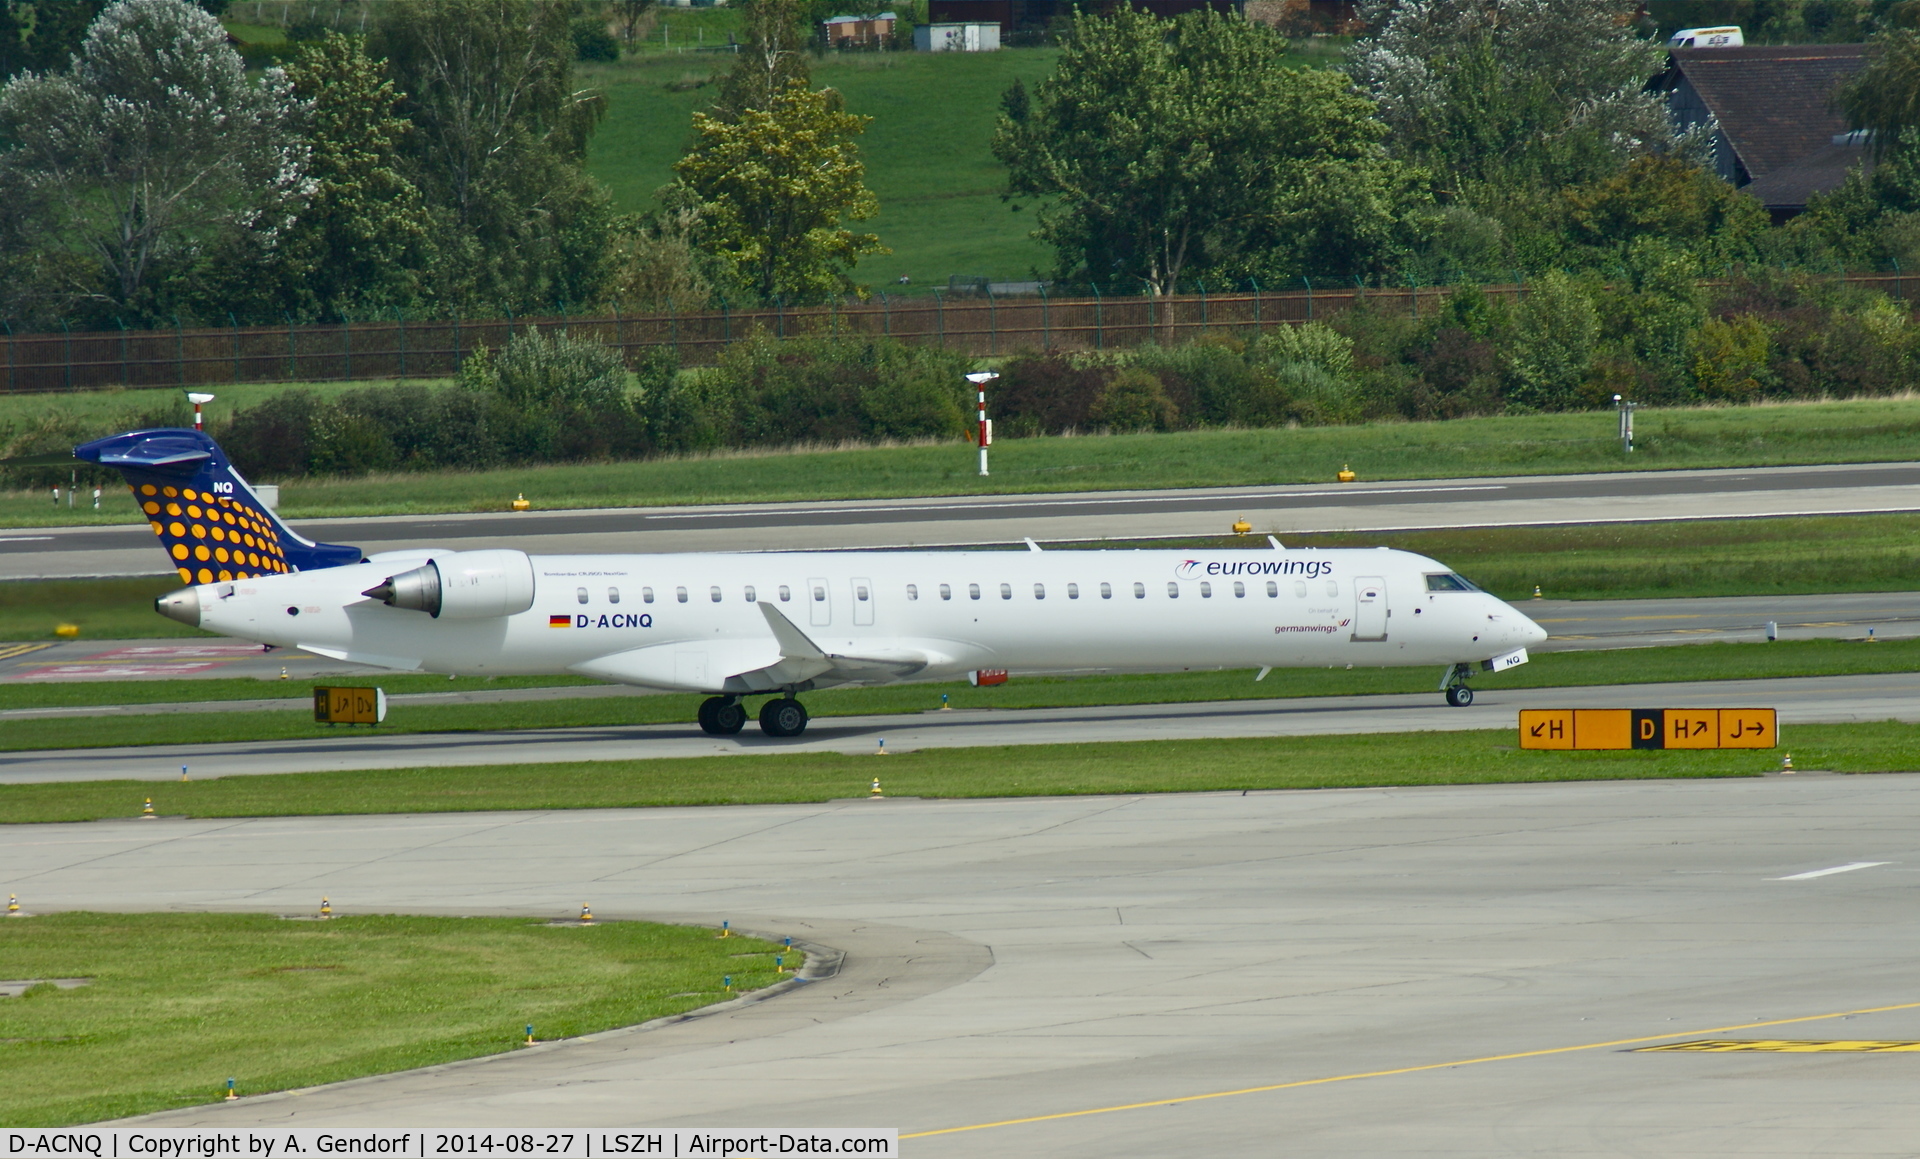 D-ACNQ, 2010 Bombardier CRJ-900LR (CL-600-2D24) C/N 15260, Eurowings (operated for Germanwings sticker), is here on taxiway 